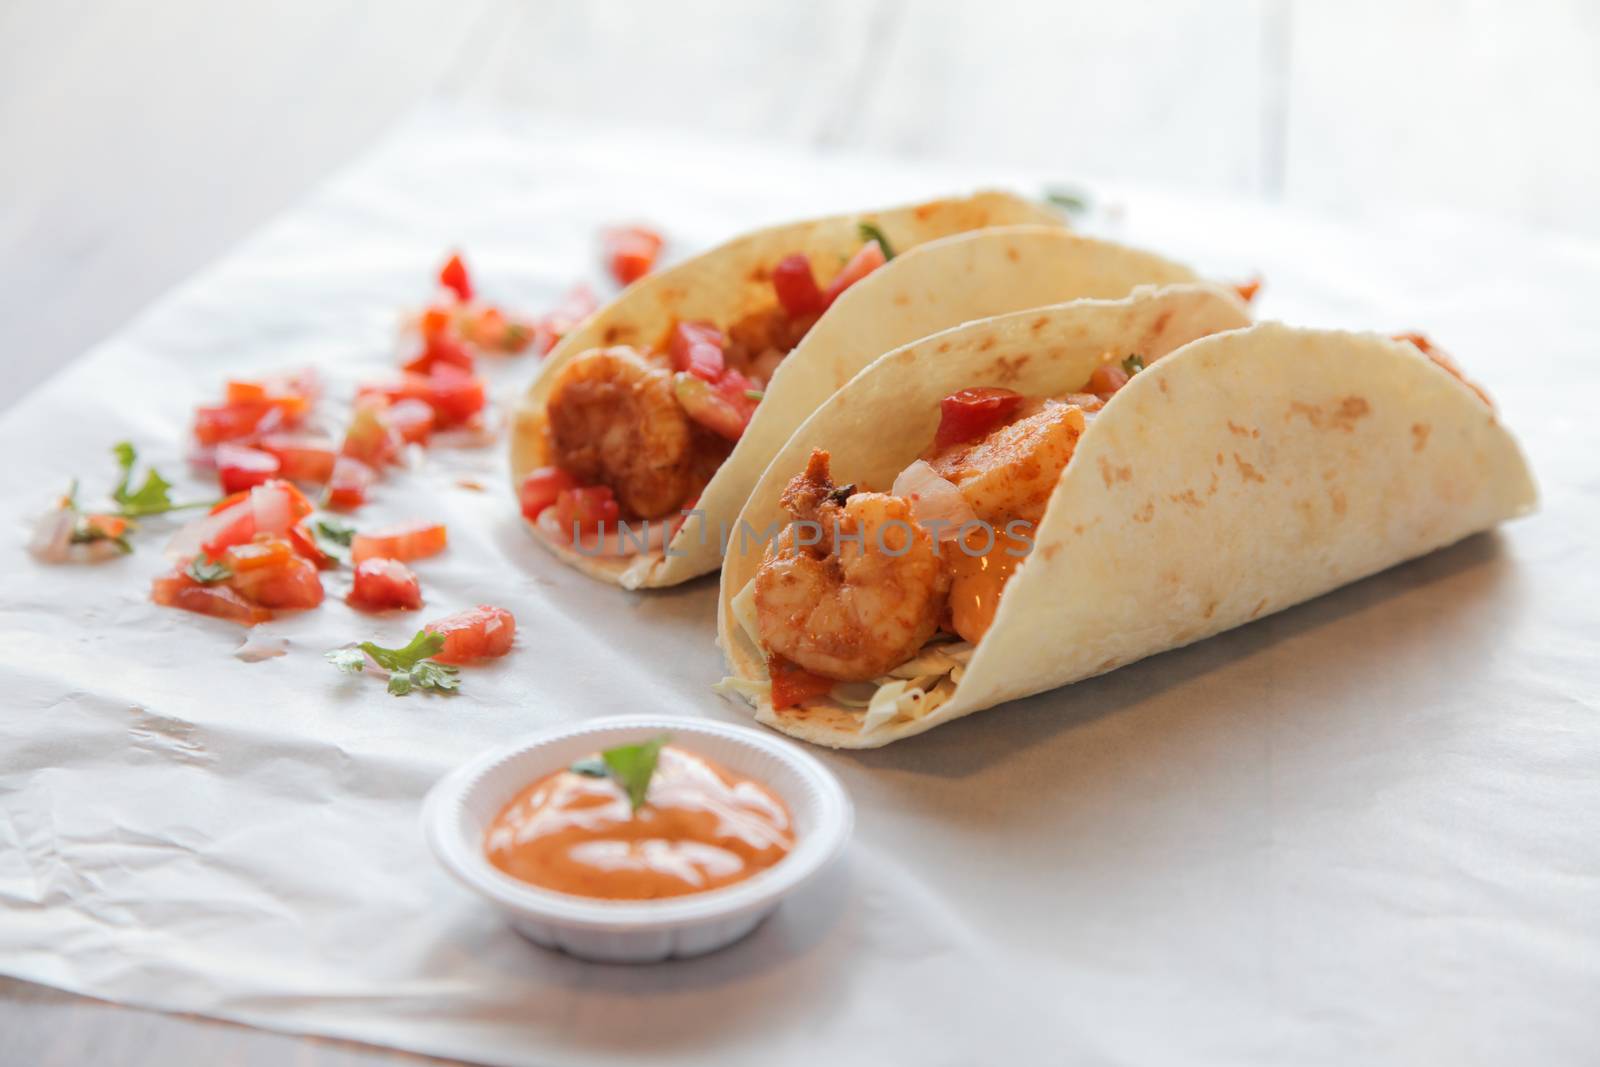 Prawn tacos seafood with condiments